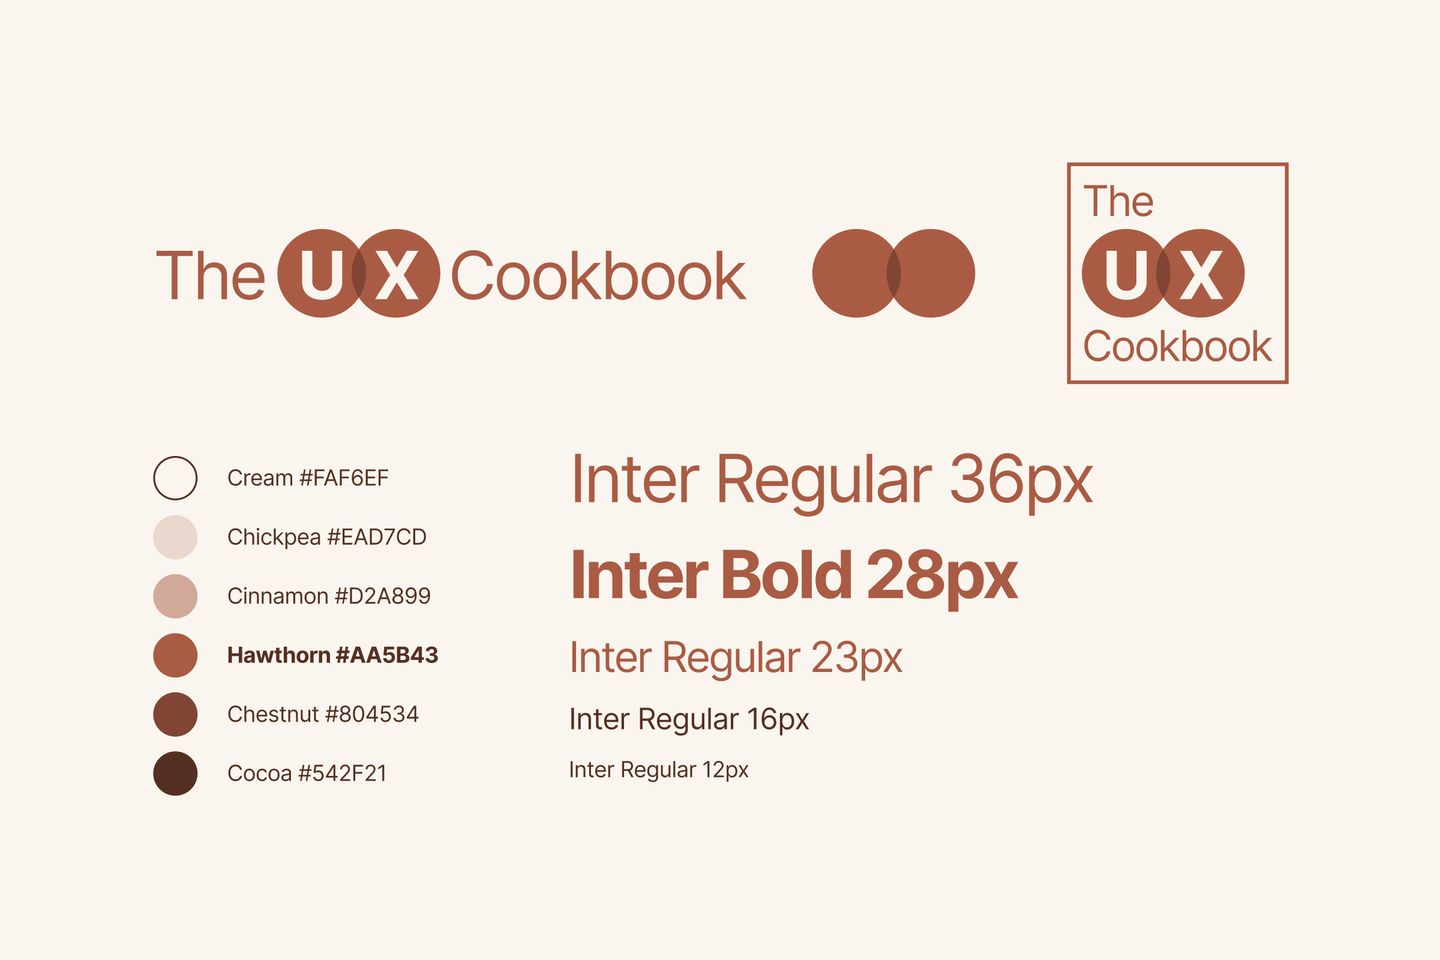 The UX Cookbook’s design reference sheet, including logos, a color palette, and typography